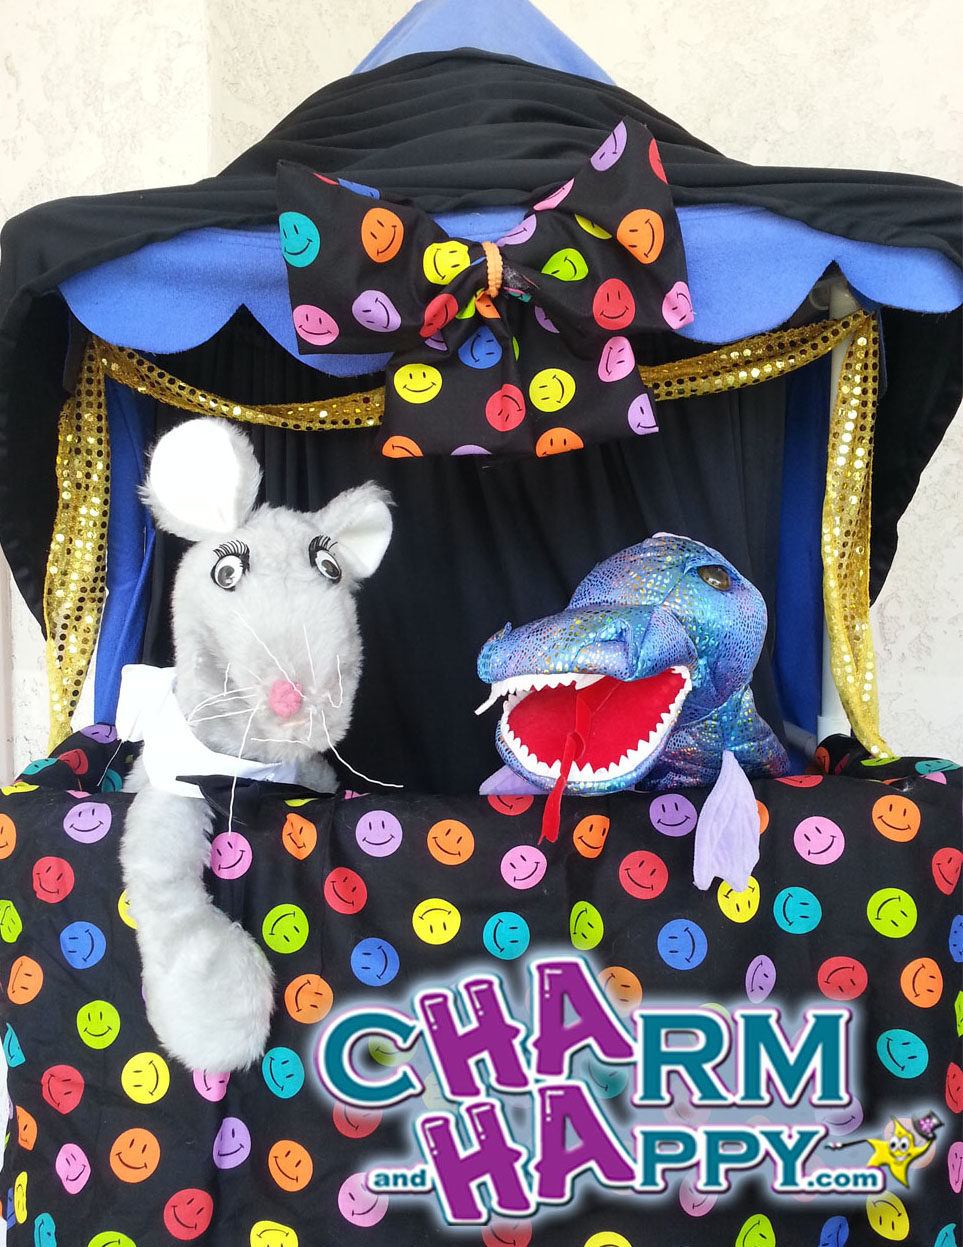 rat and reptile puppet show party by CharmandHappy.com SoCal Los Angeles